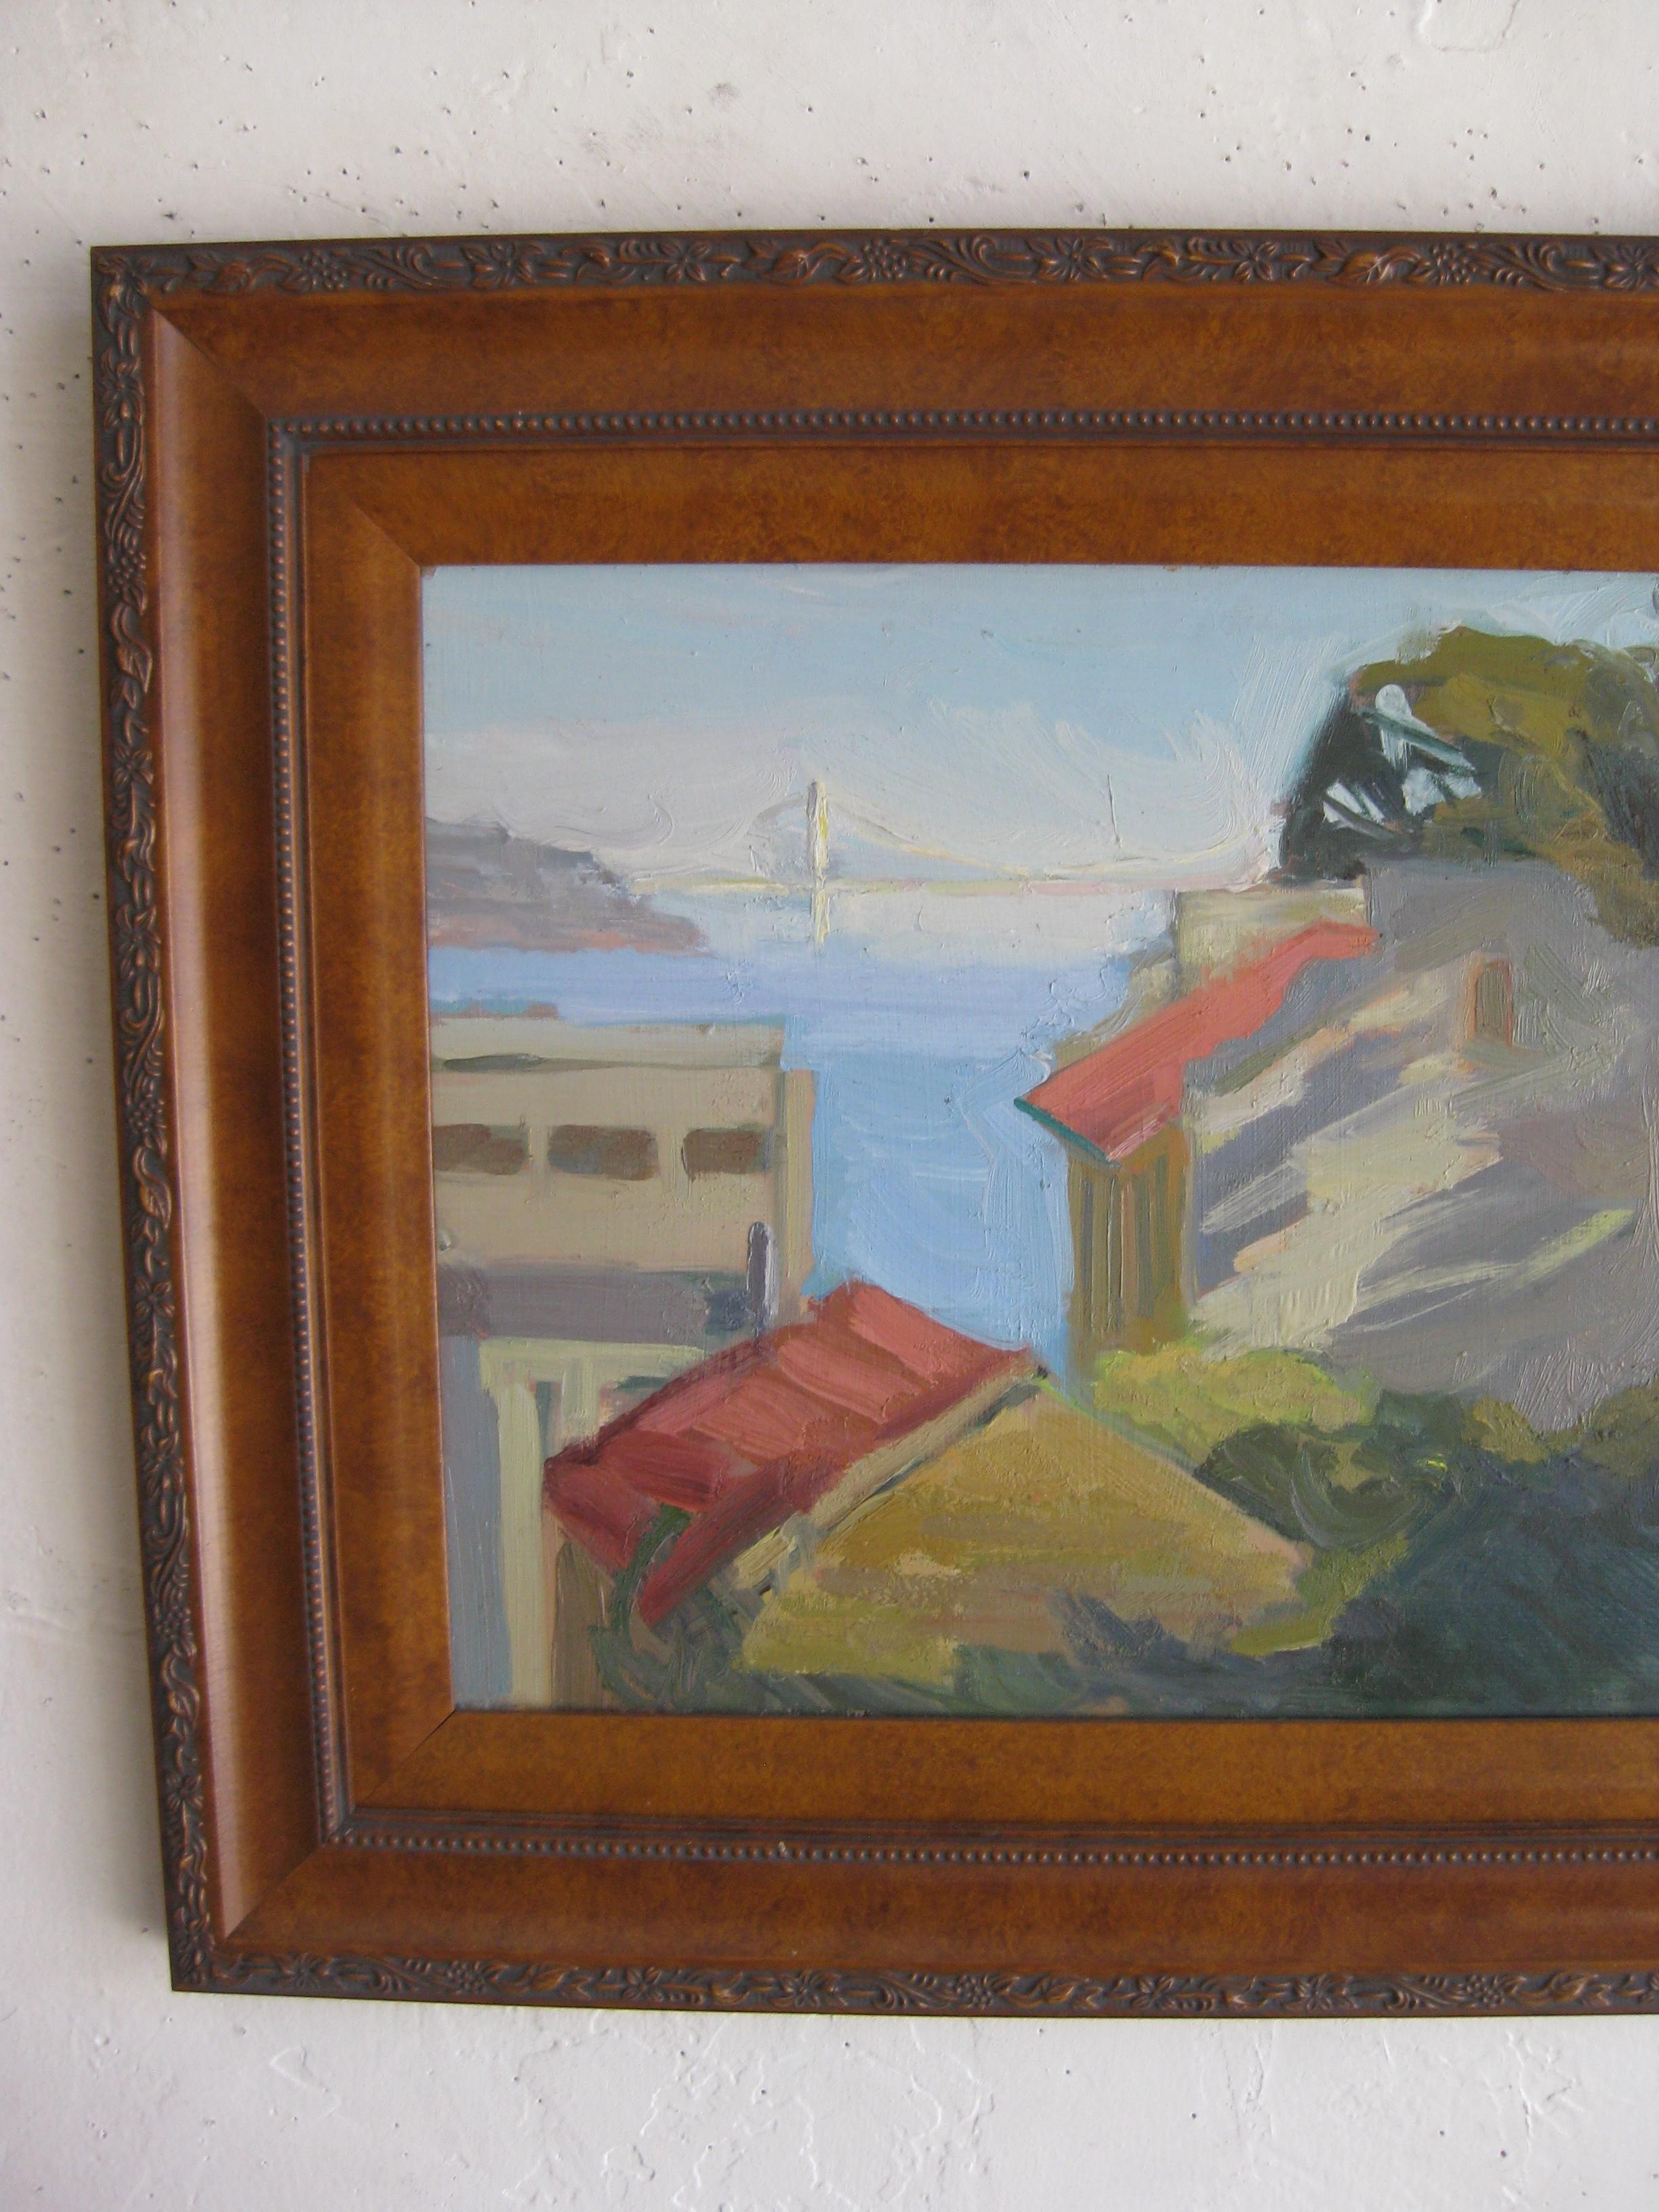 Outstanding landscape impressionist oil painting by California listed artist Jeanette Le Grue. The painting is of the San Francisco Oakland Bay Bridge. Signed in the lower corner. The oil painting is painted on masonite board. Great colors and